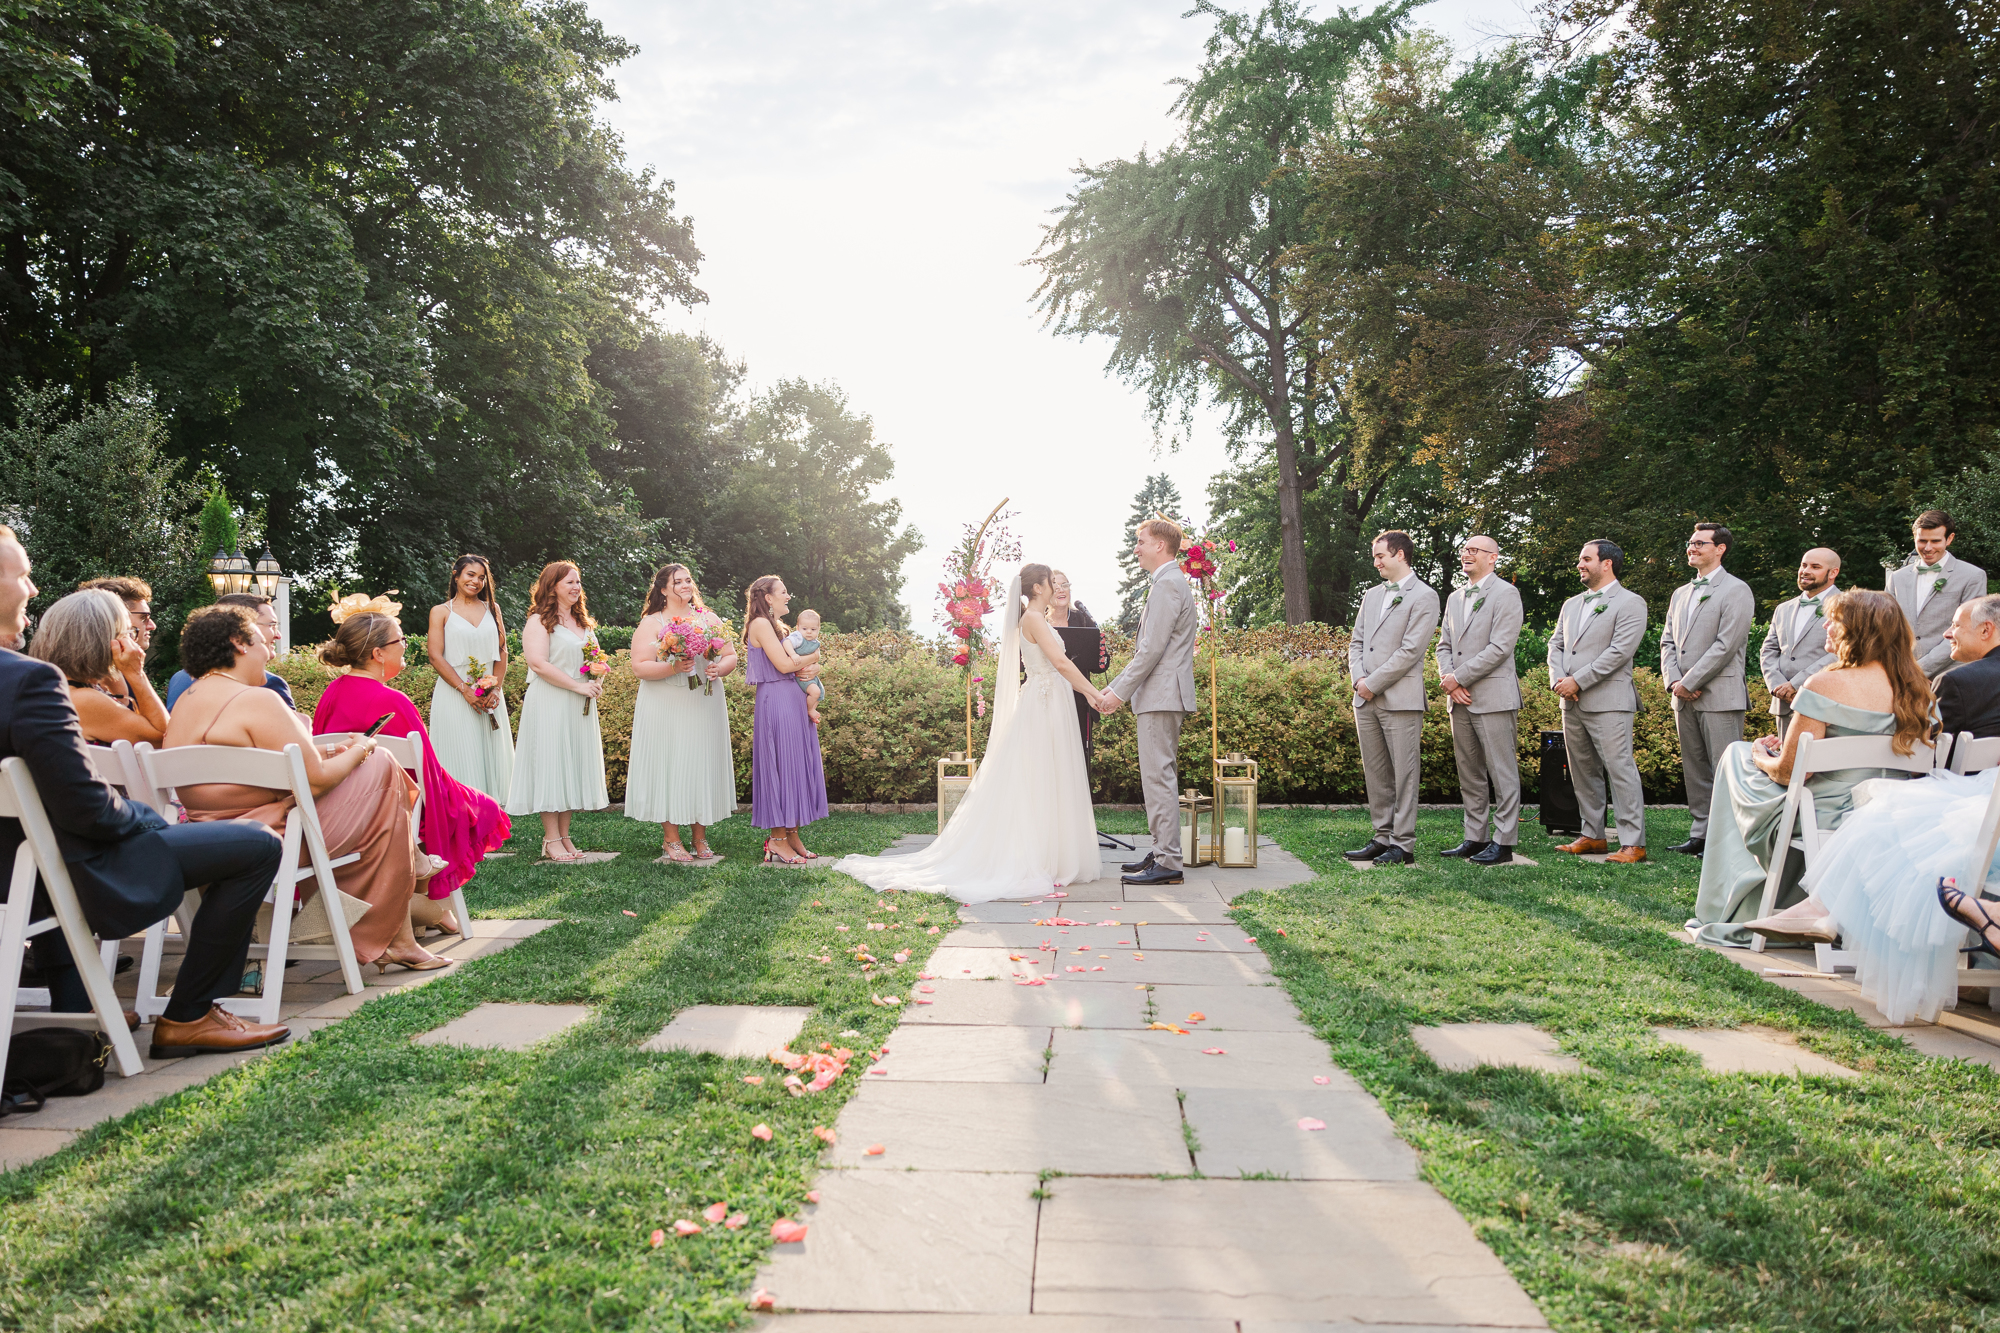 Playful Wedding at Briarcliff Manor in Summertime